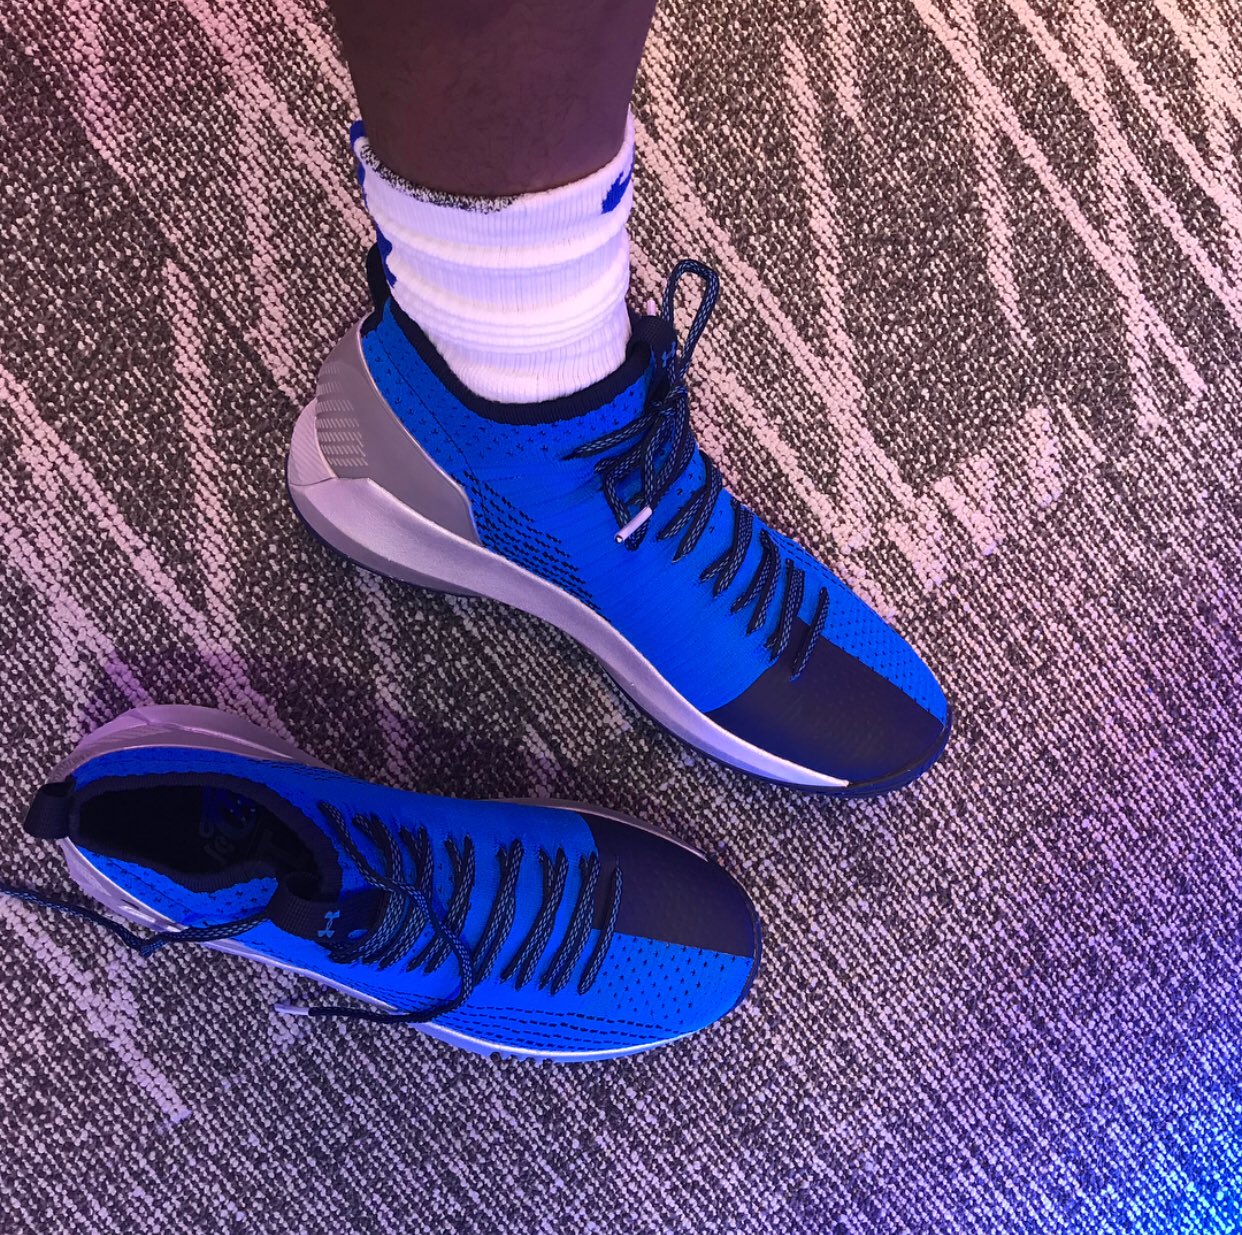 dennis smith under armour shoes